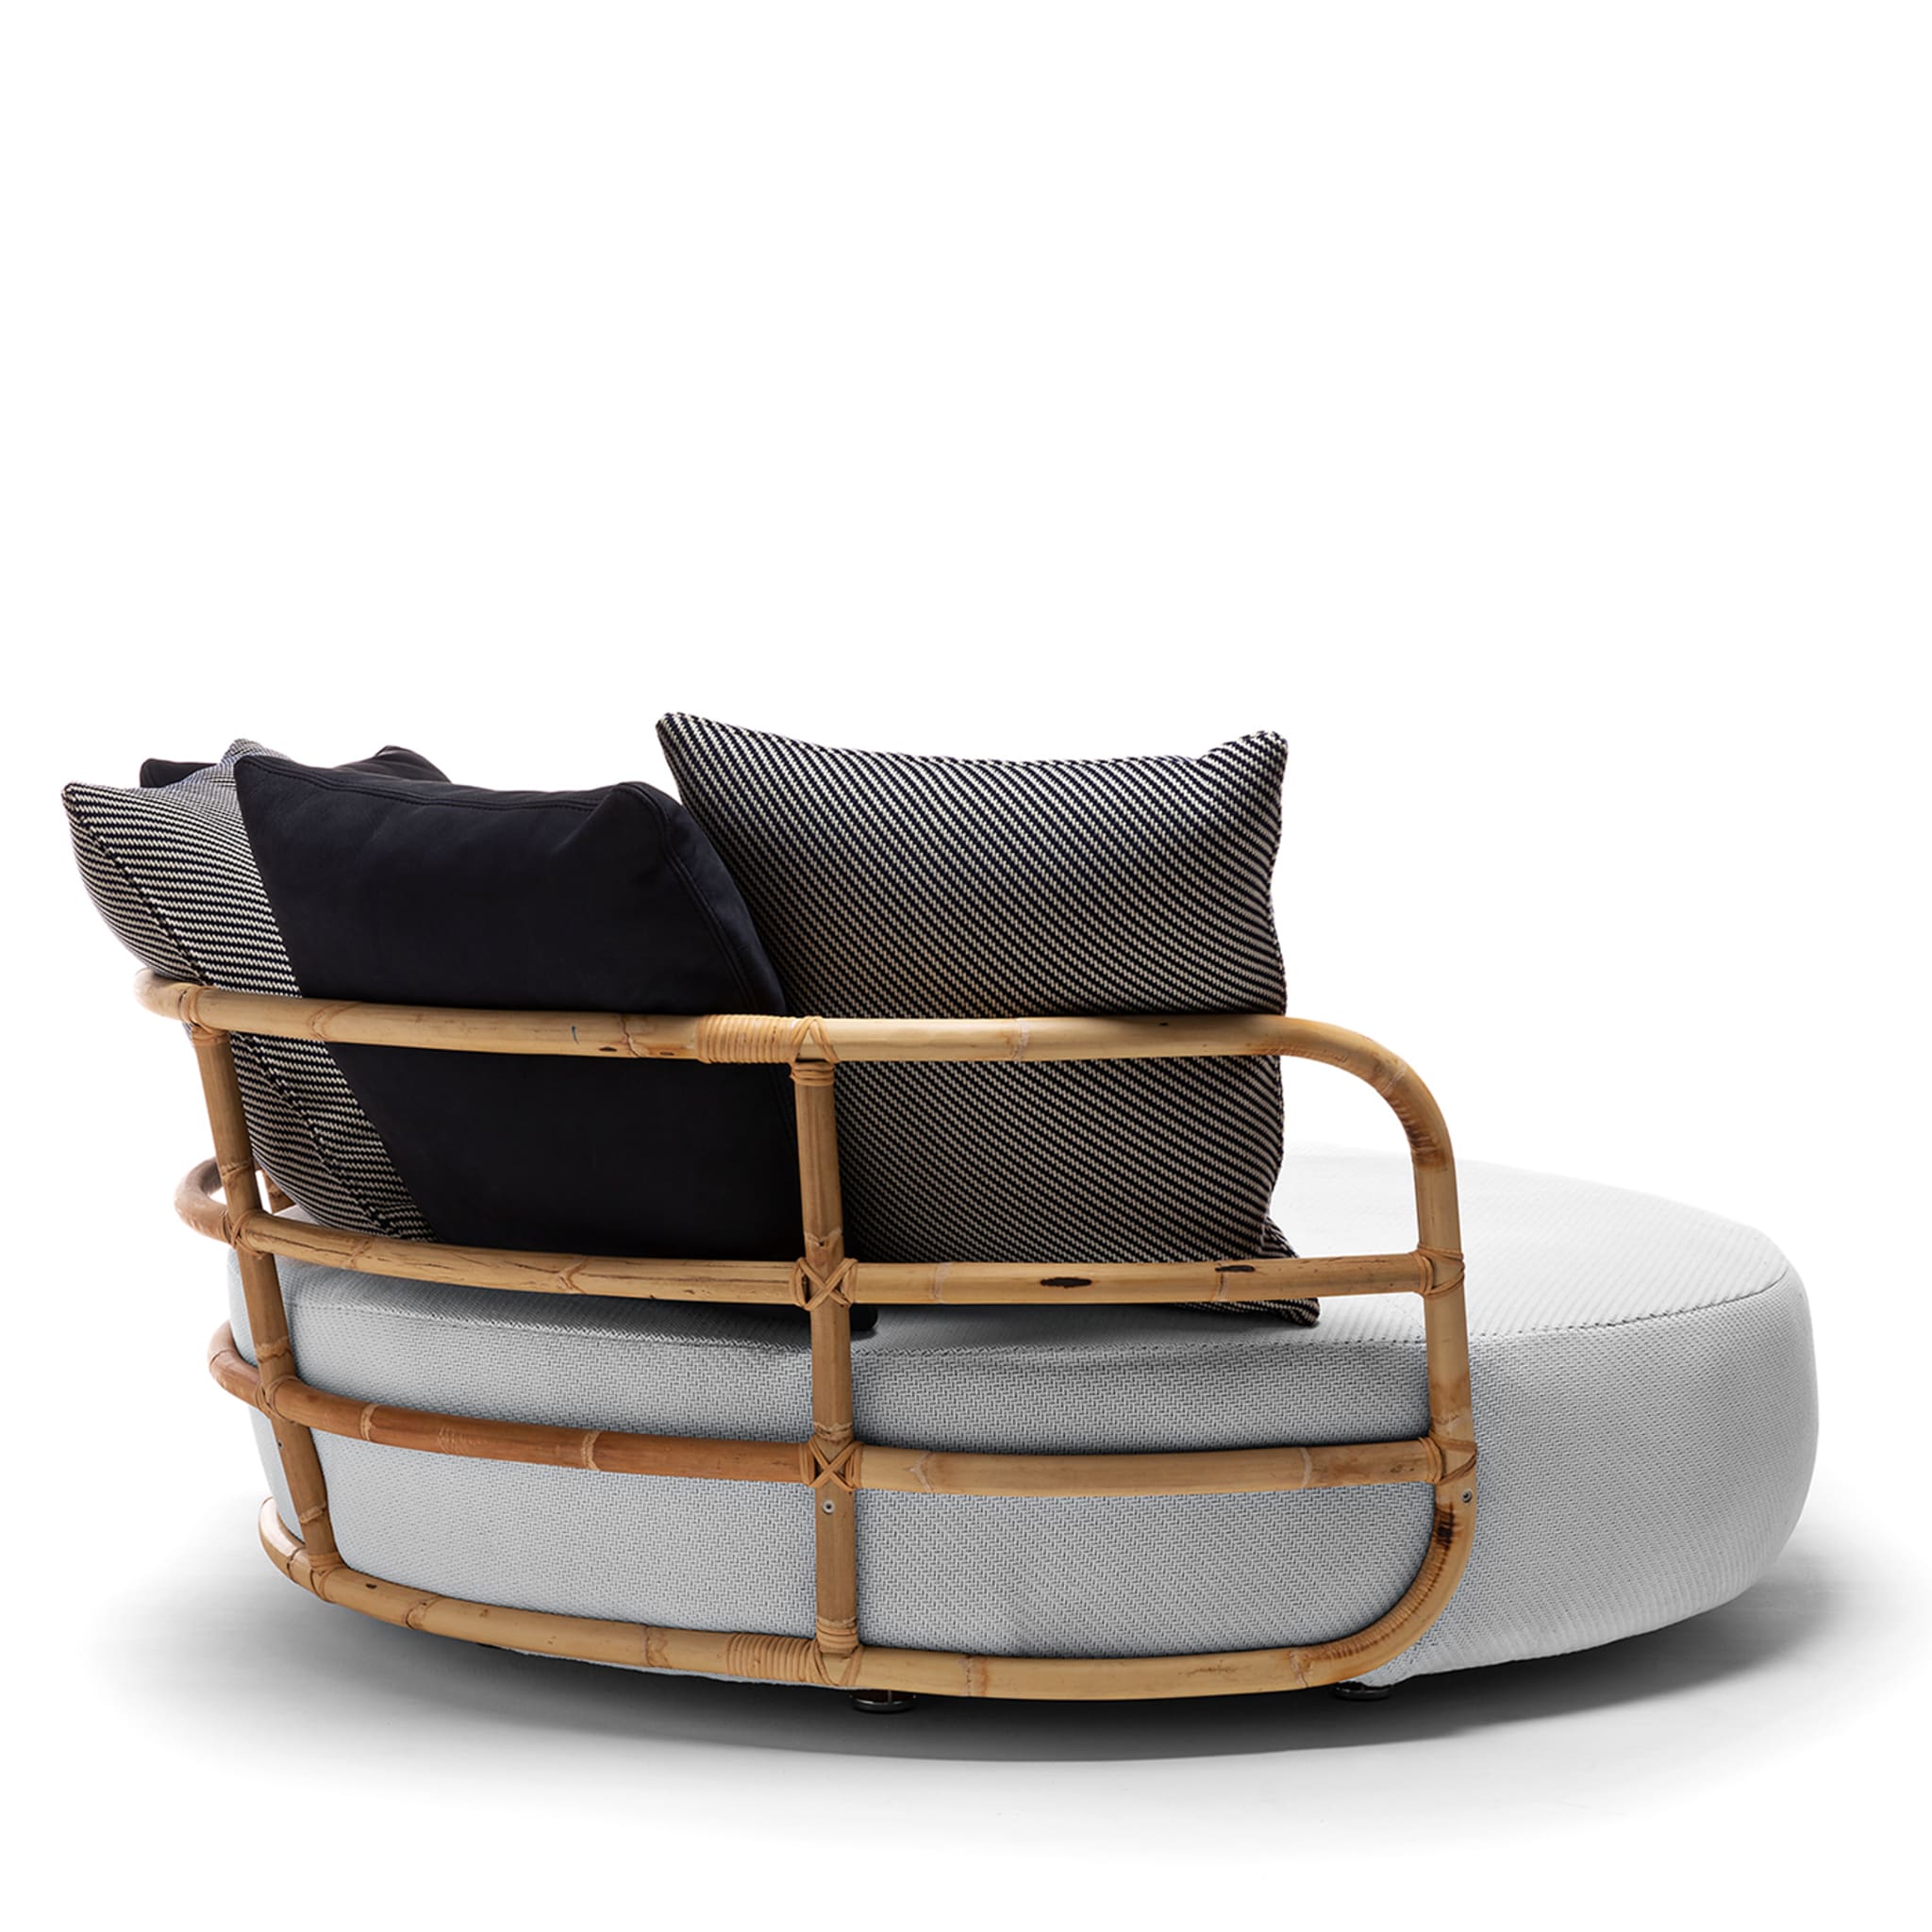 Jungle Daybed by Massimo Castagna - Alternative view 5